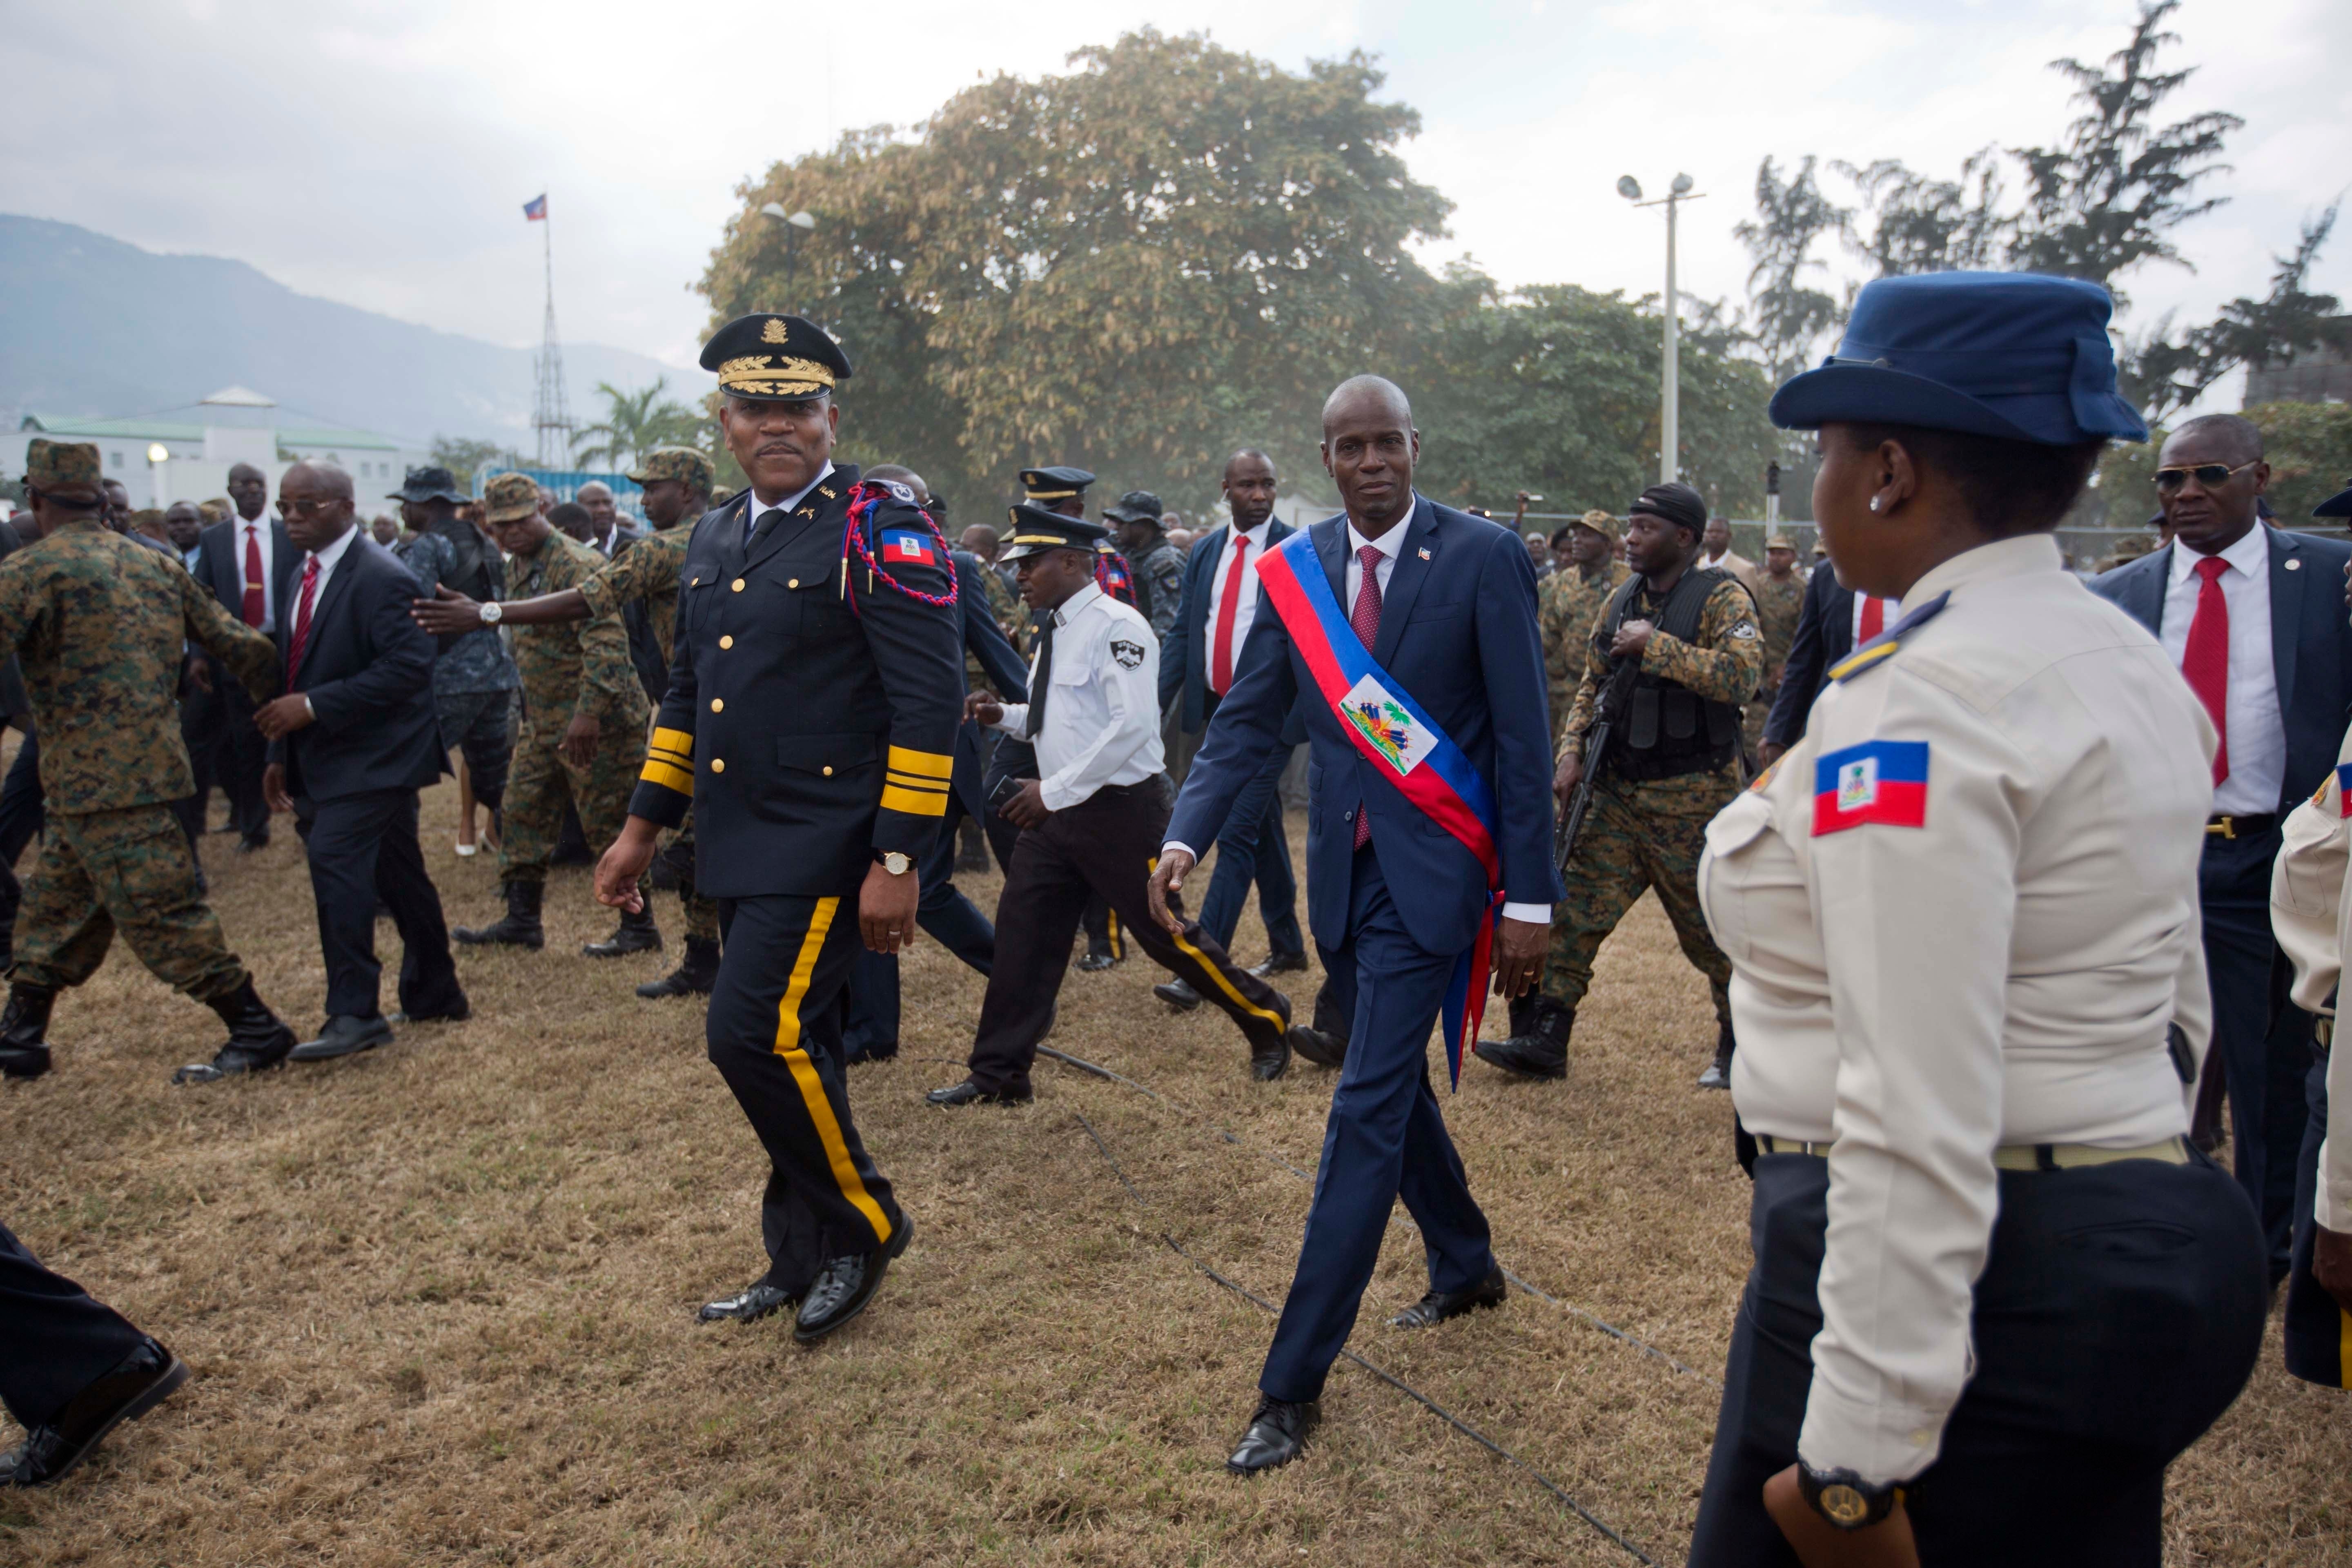 Newly sworn-in Haitian President Jovenel Moise walks with Police Chief Michel-Ange Gedeon past National Police at the National Palace after his inauguration ceremony in 2017